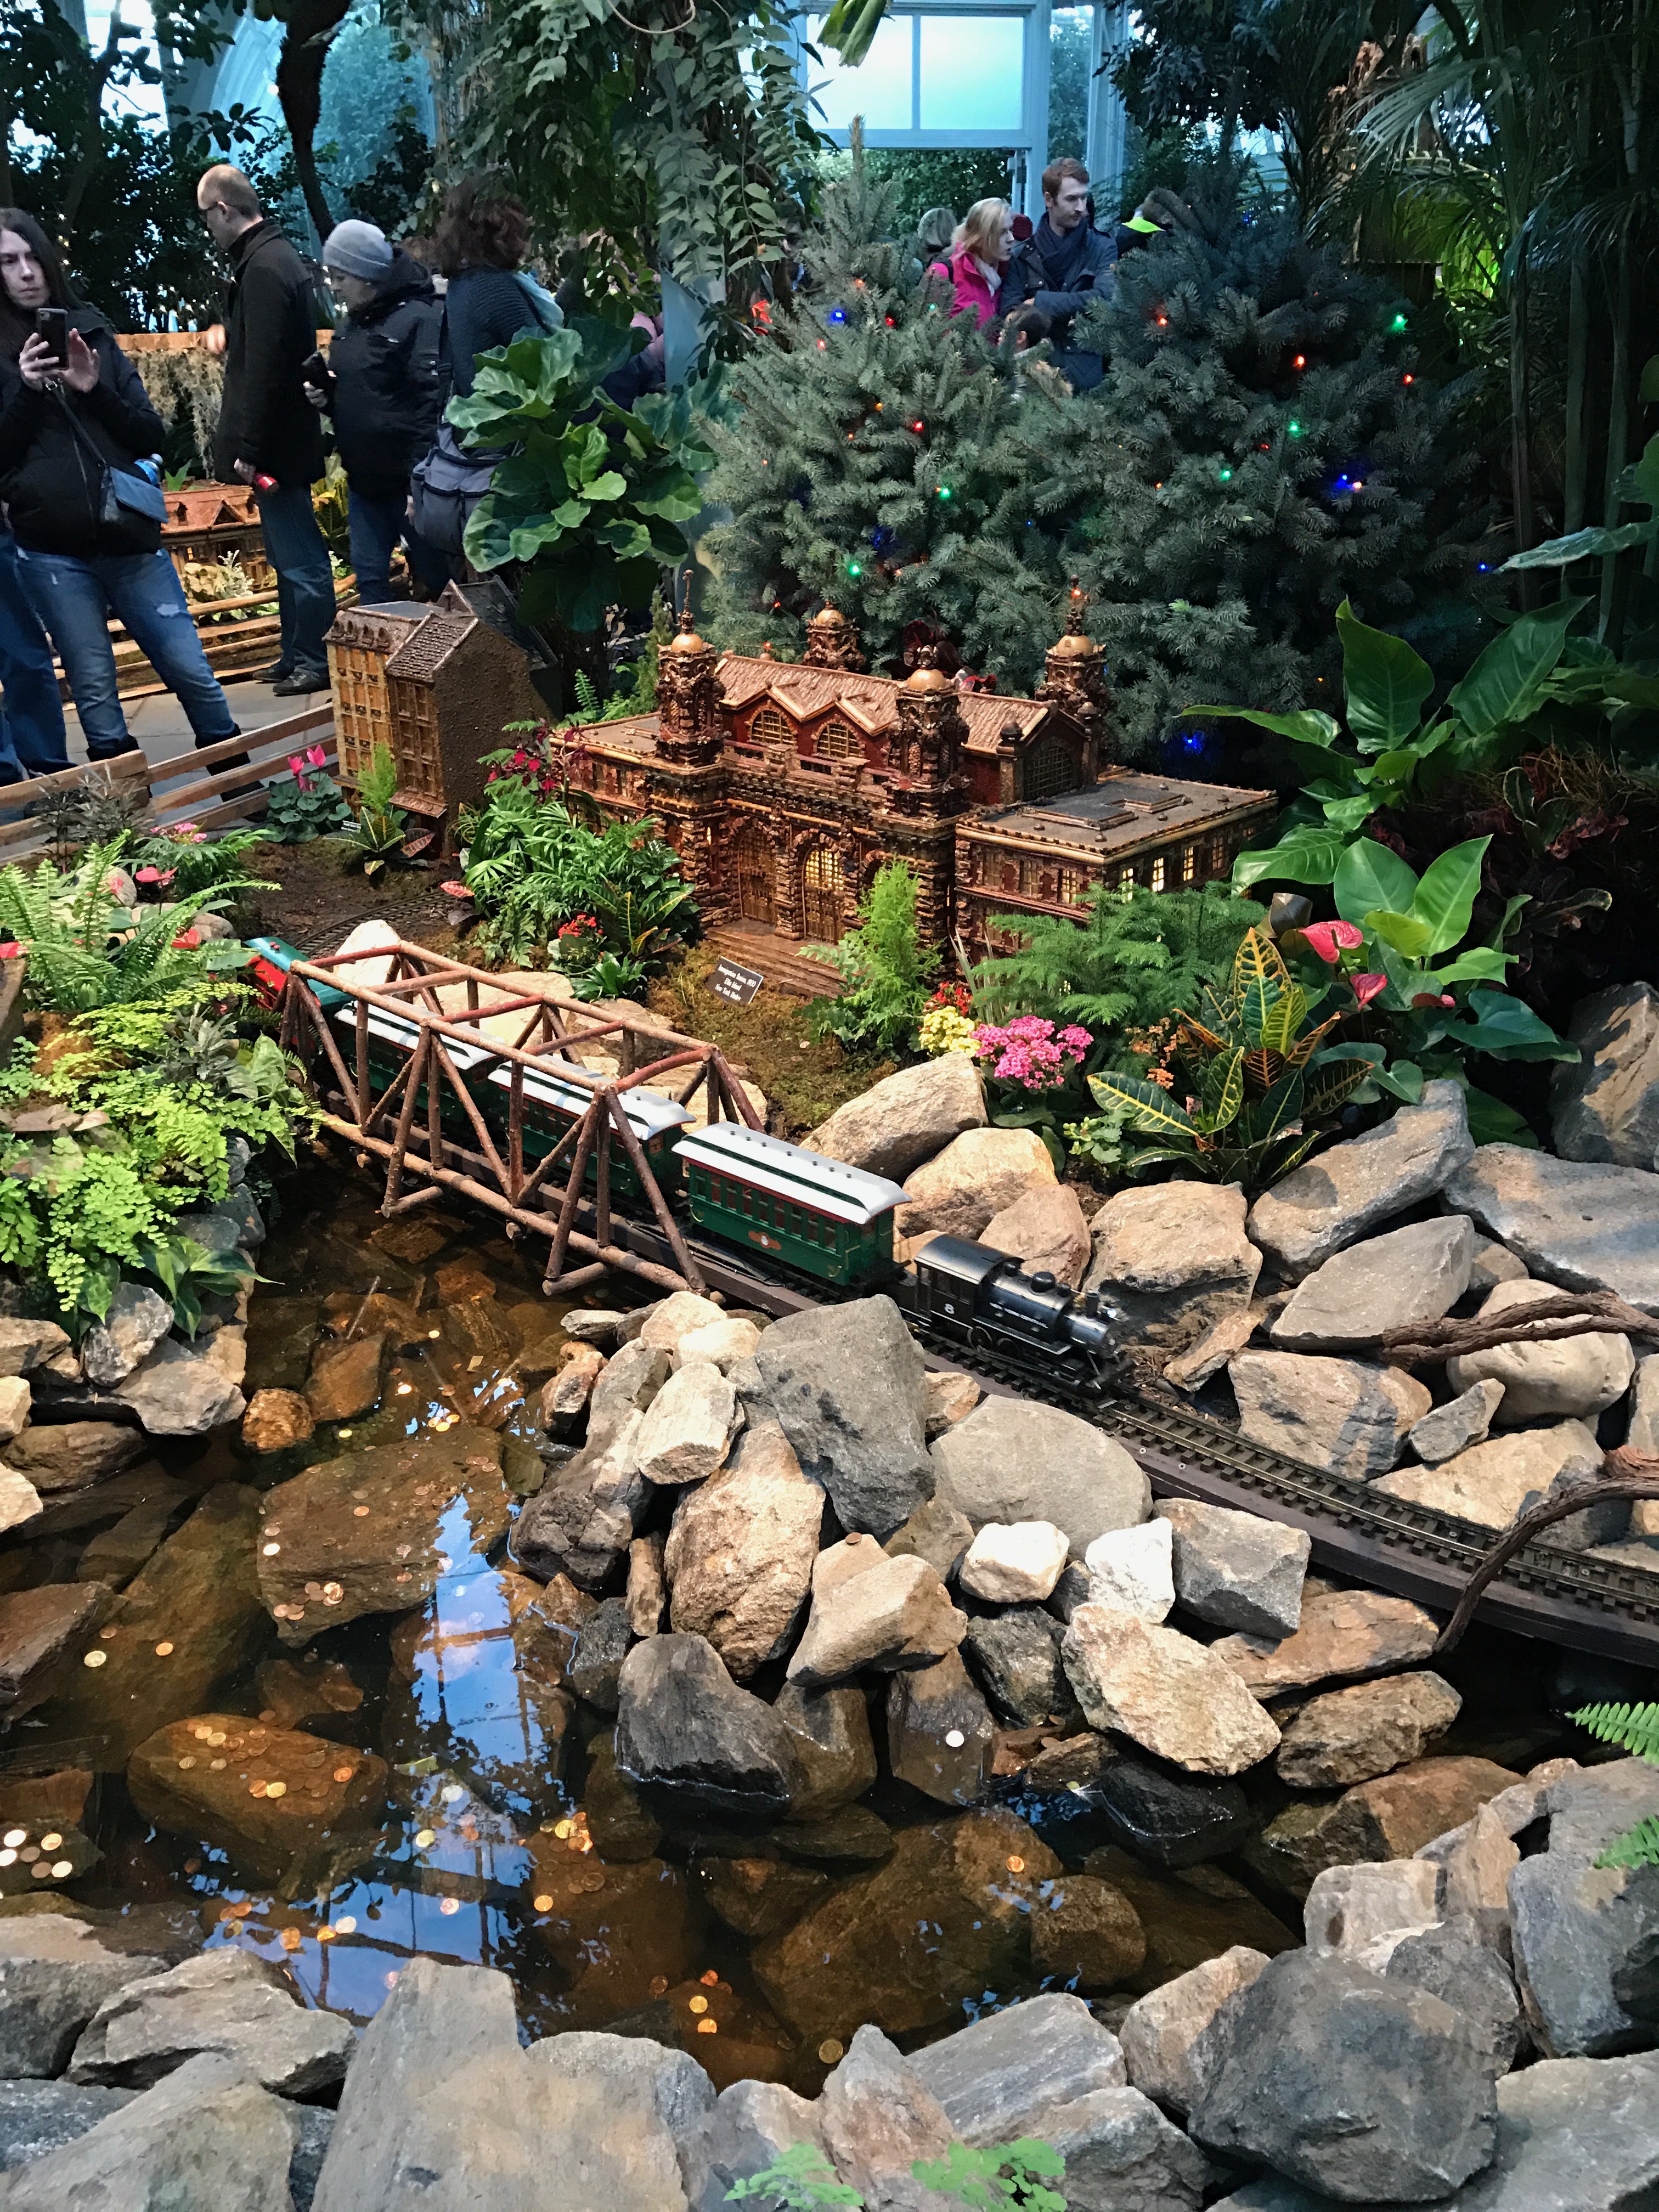 The New York Botanical Garden Holiday Train Show is great for